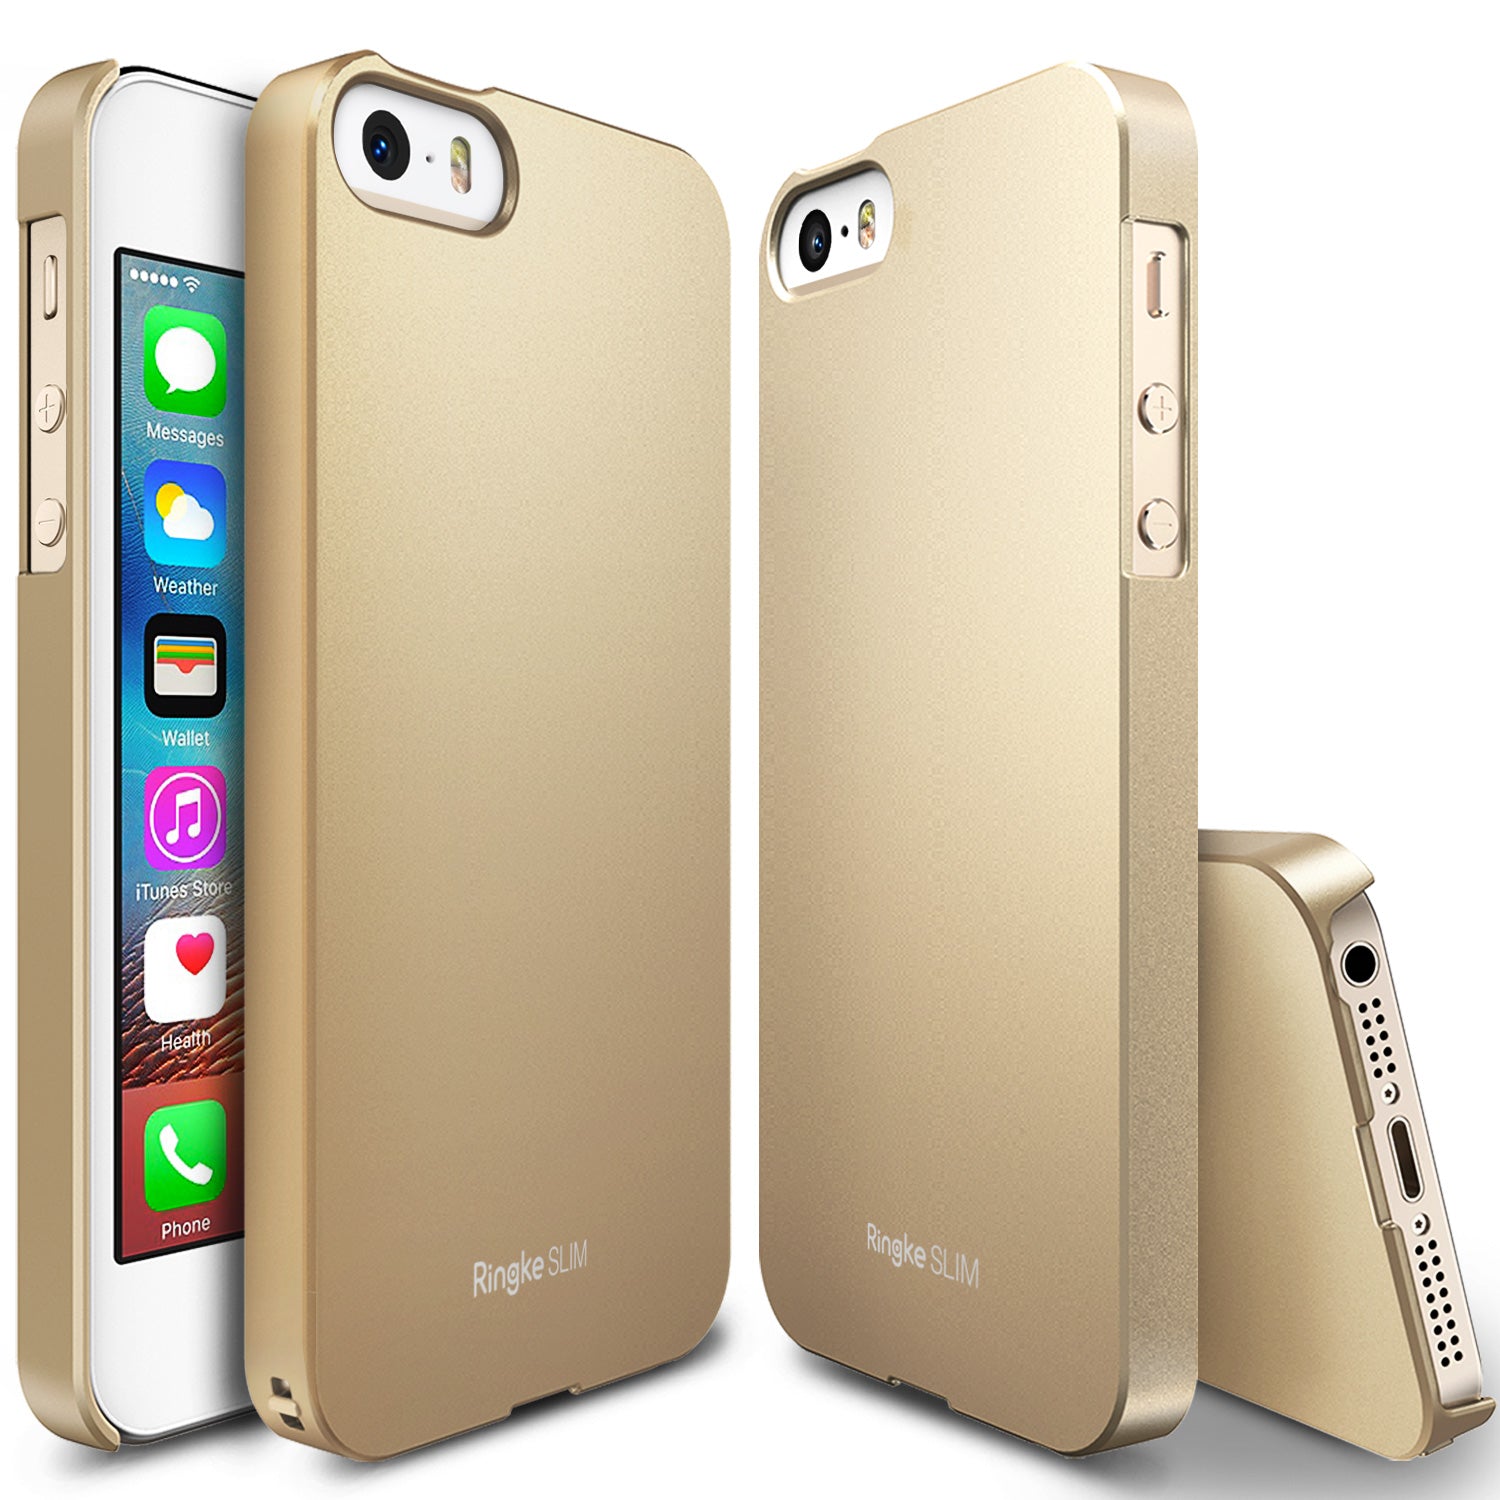 ringke slim lightweight hard pc thin case cover for iphone se 5s 5 main royal gold